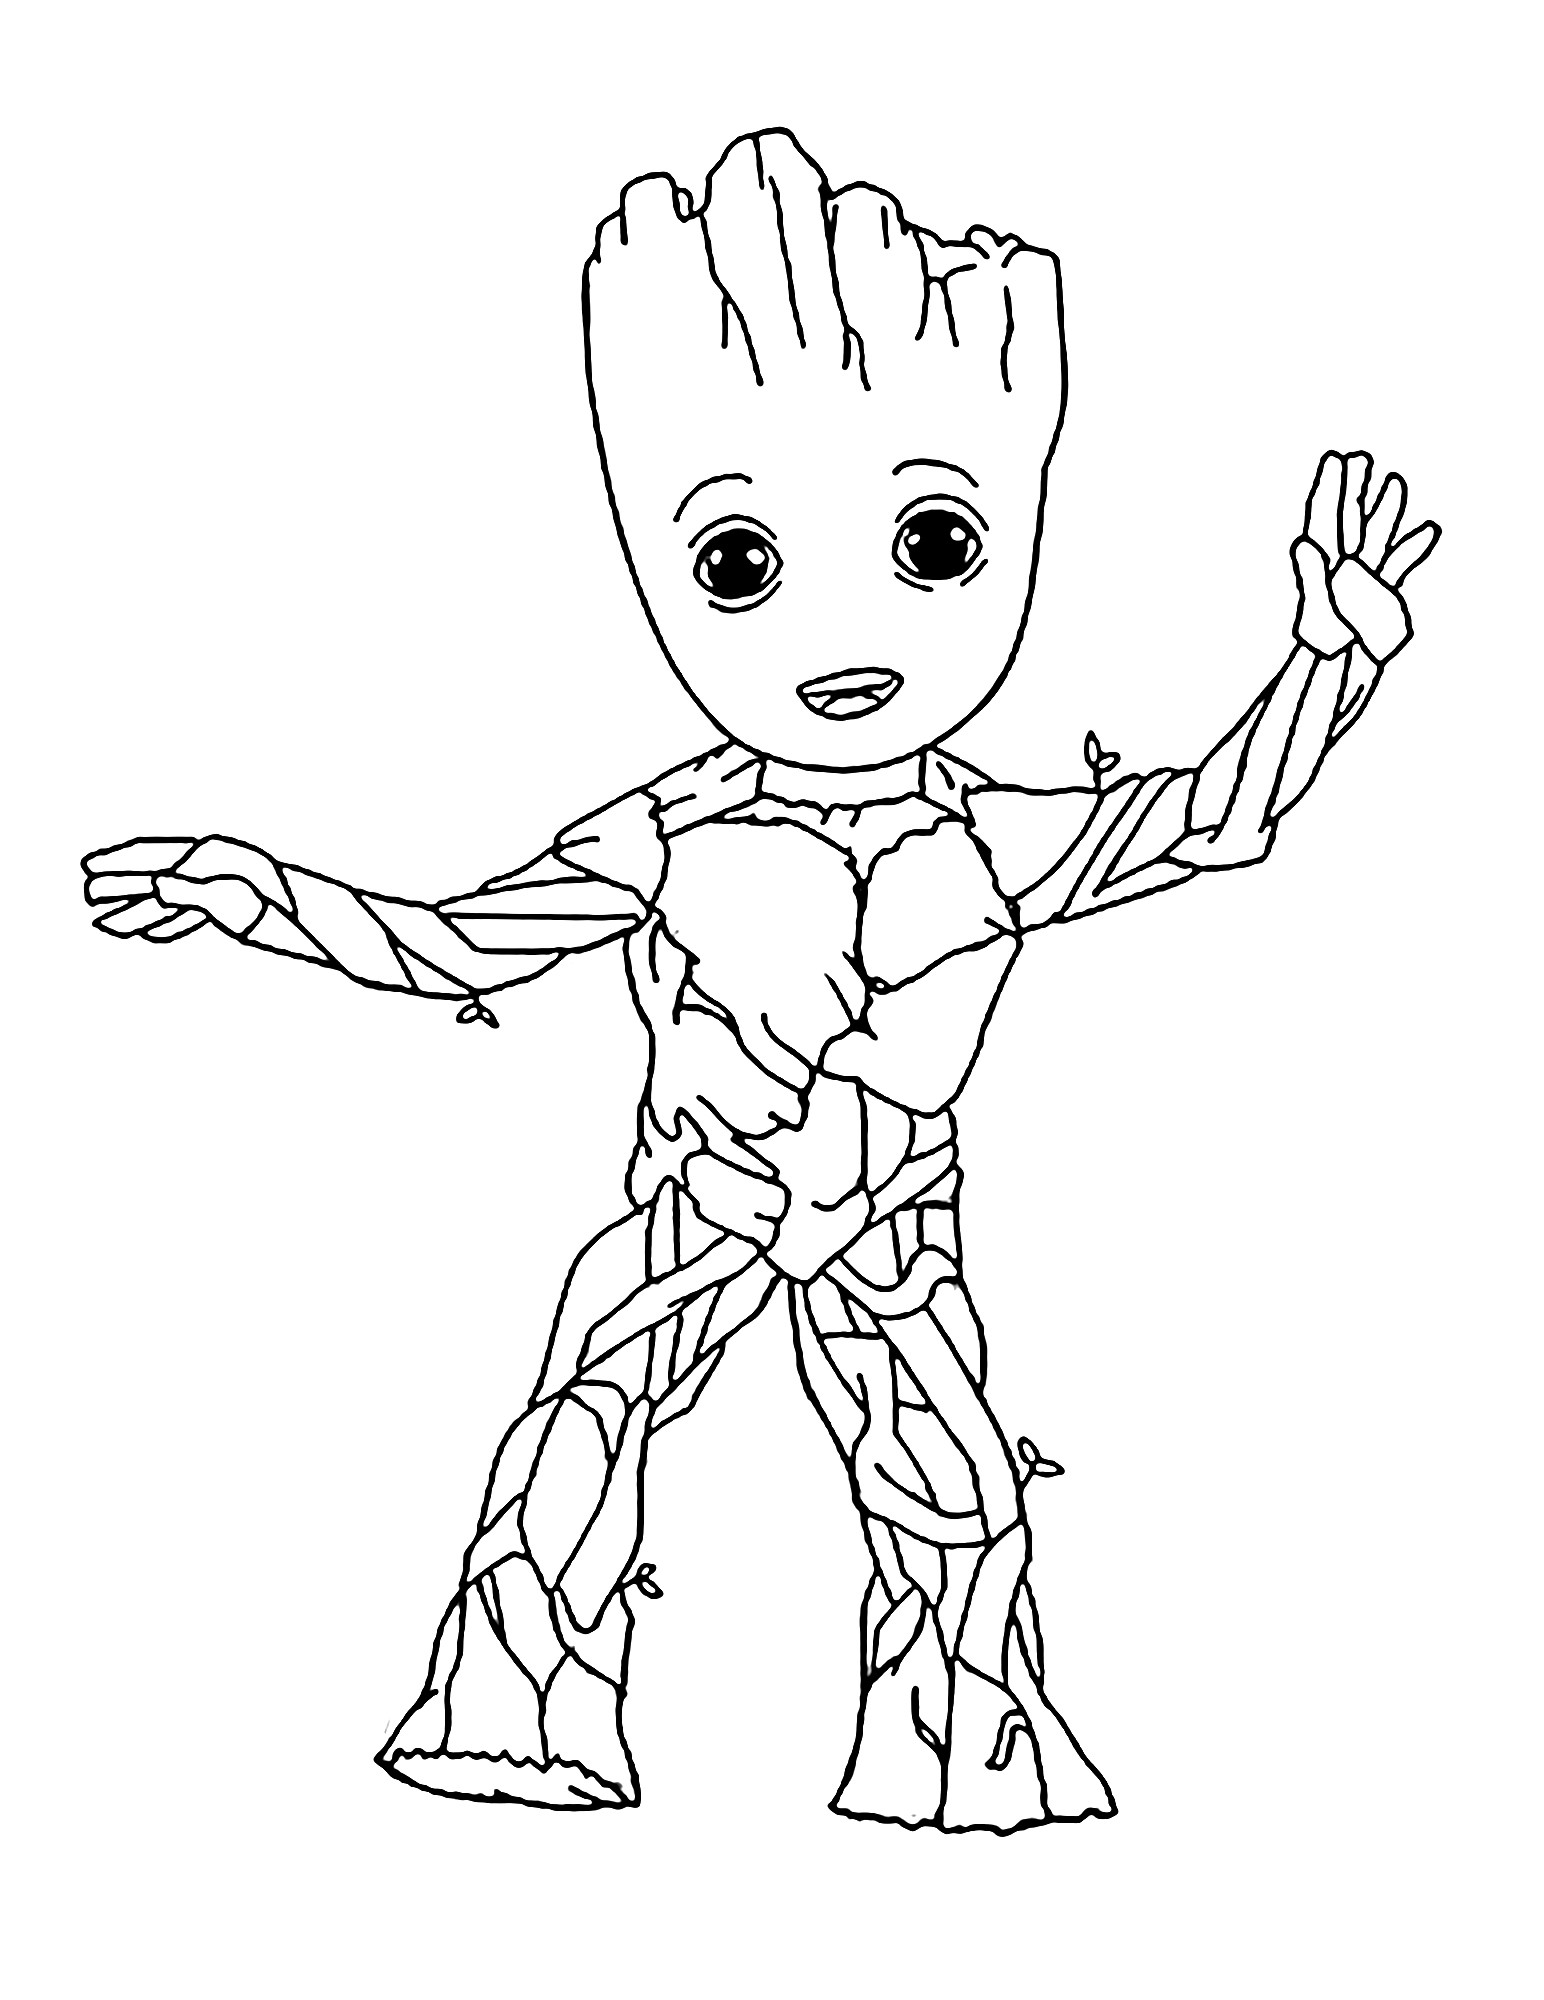 Baby Groot Coloring Page
 Groot Pages Coloring Pages